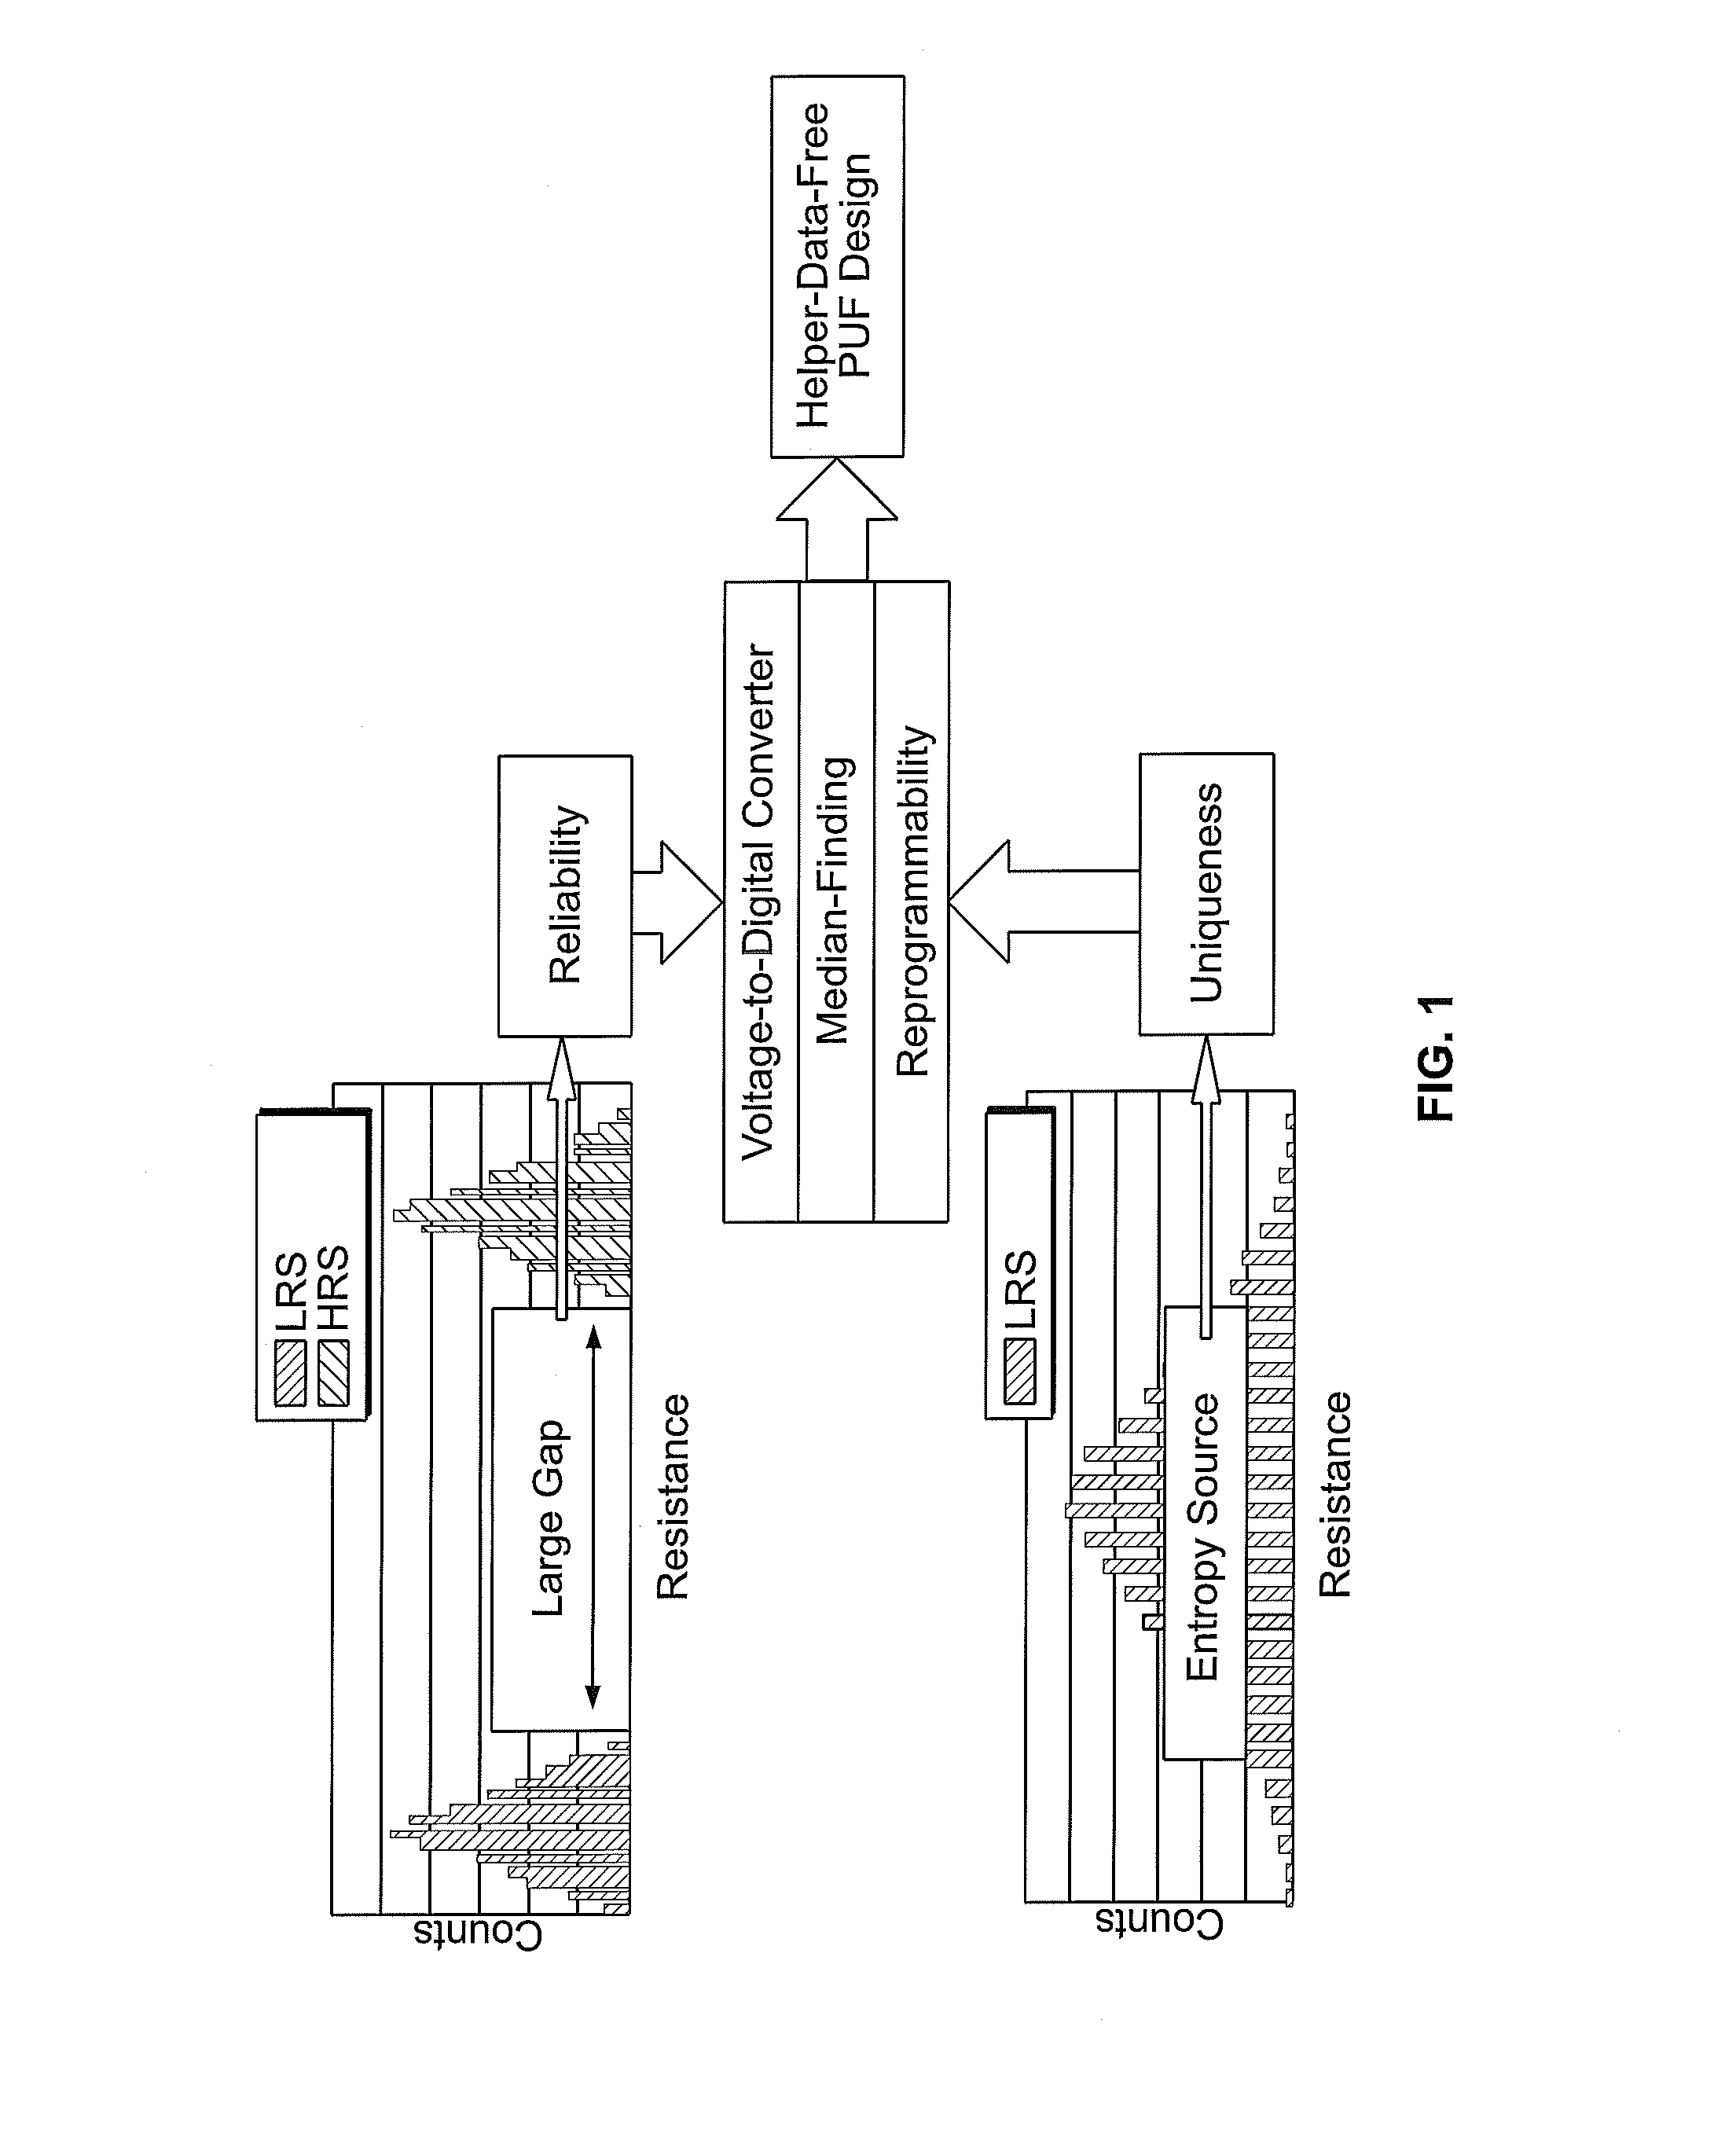 Systems and methods for generating physically unclonable functions from non-volatile memory cells